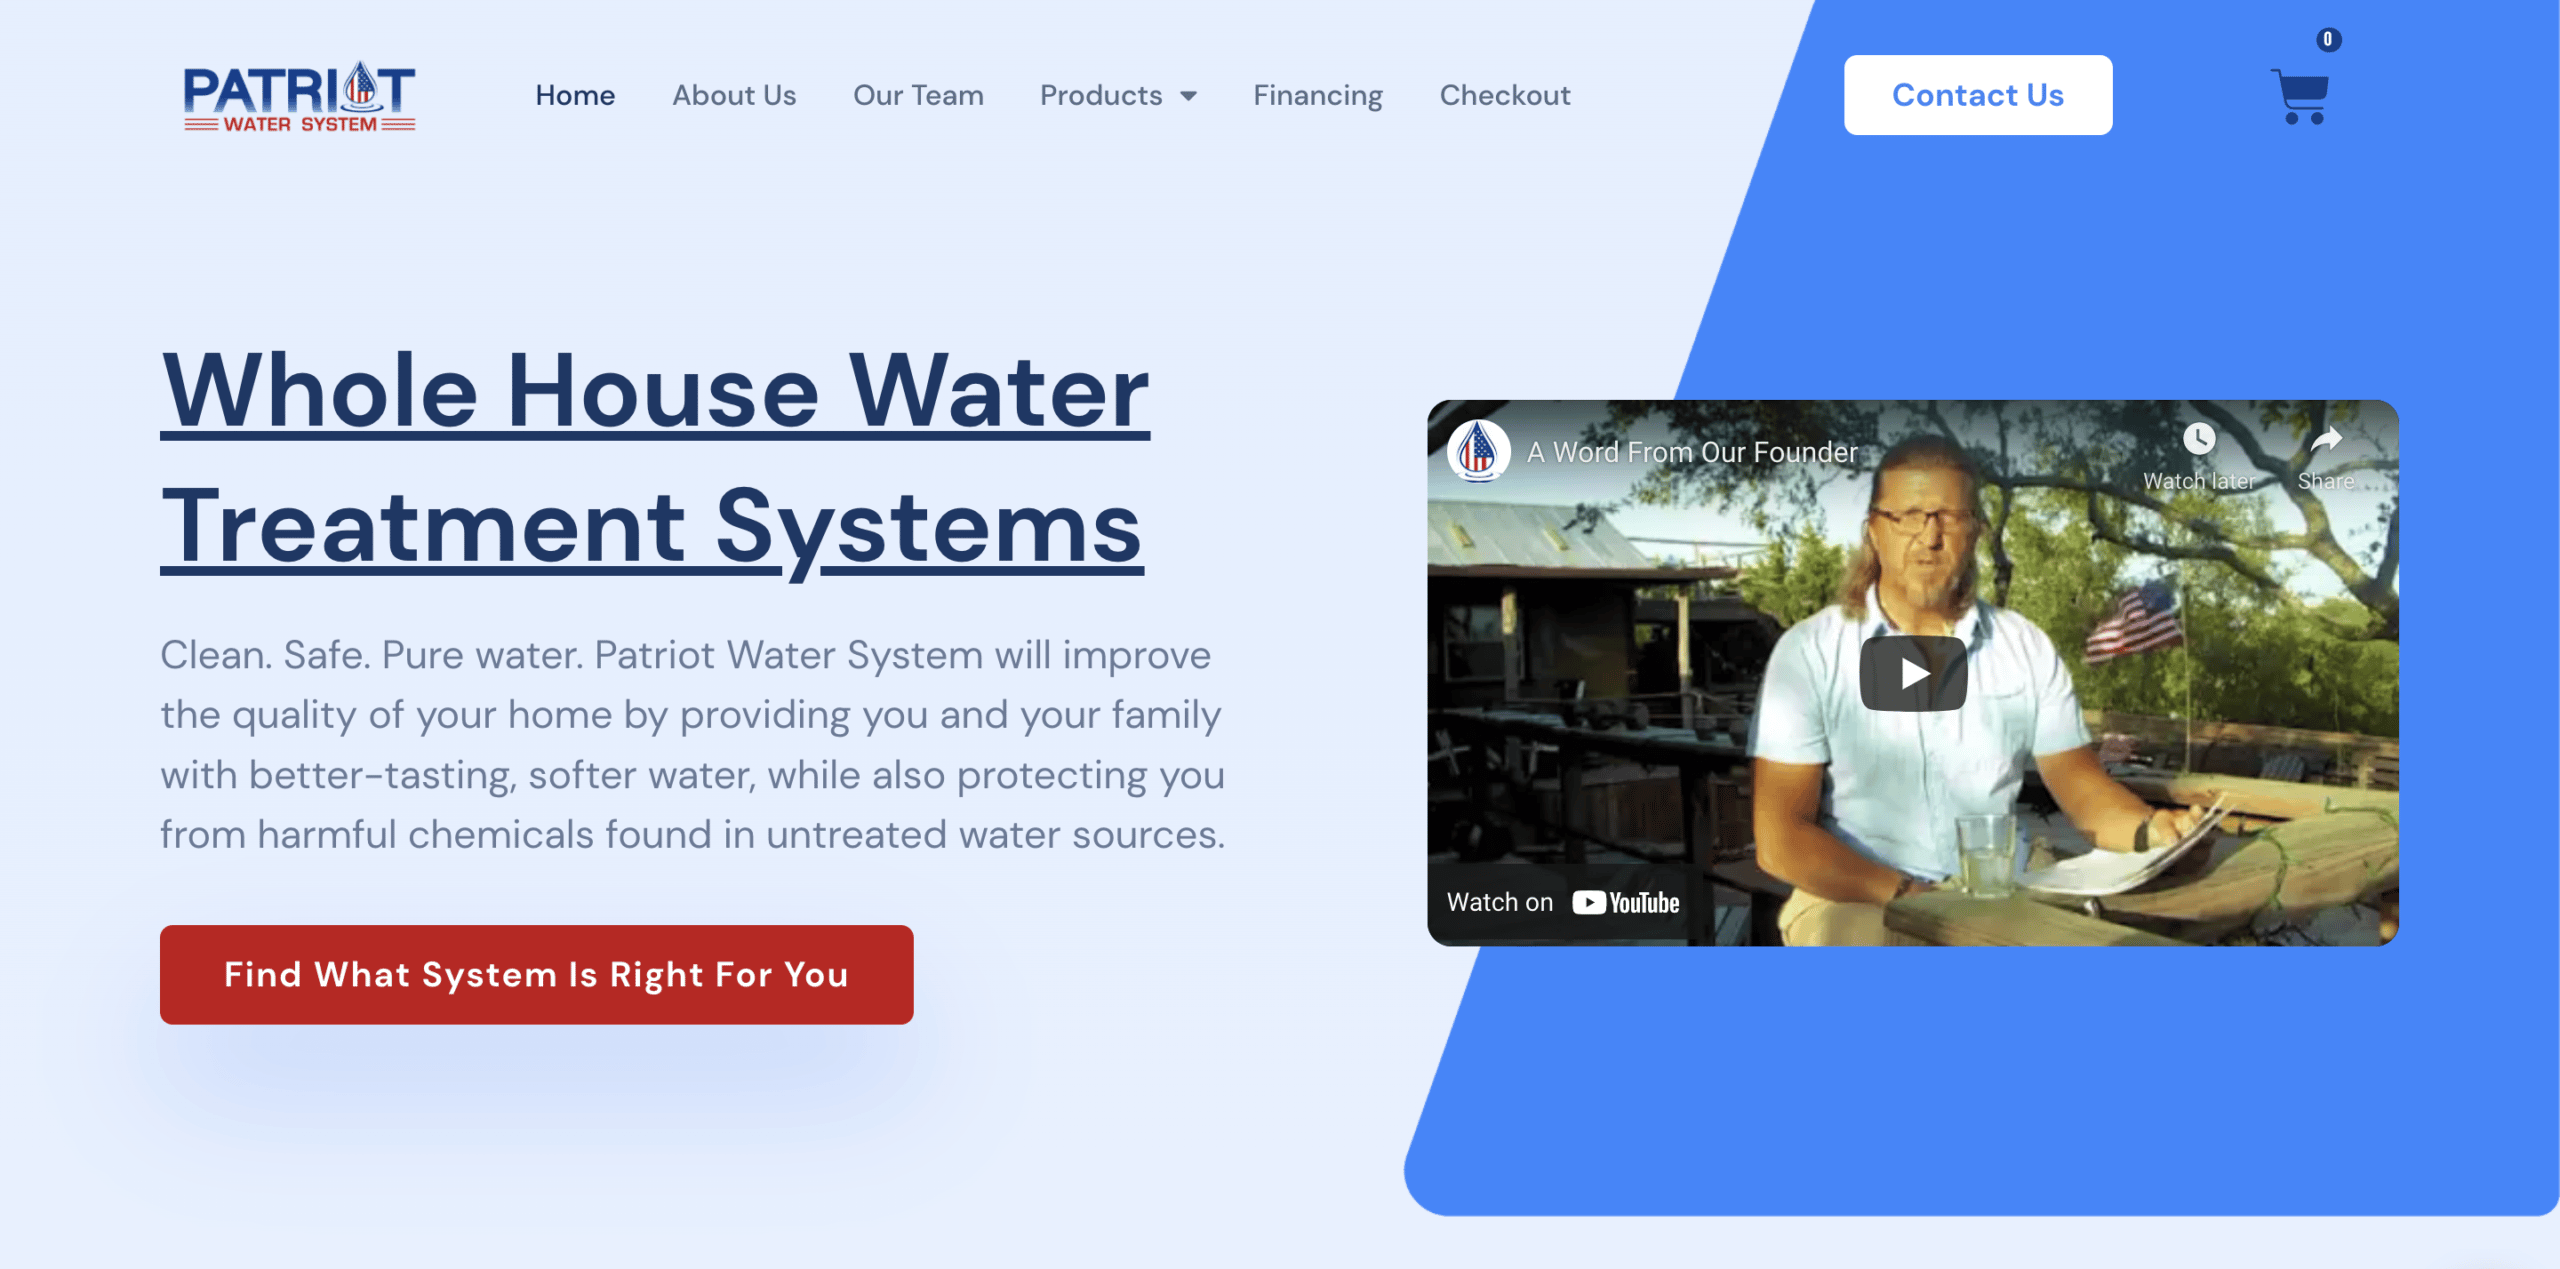 Website homepage for patriot water treatment systems featuring a video testimony with an American flag in the background, highlighted in our Website Design Portfolio.